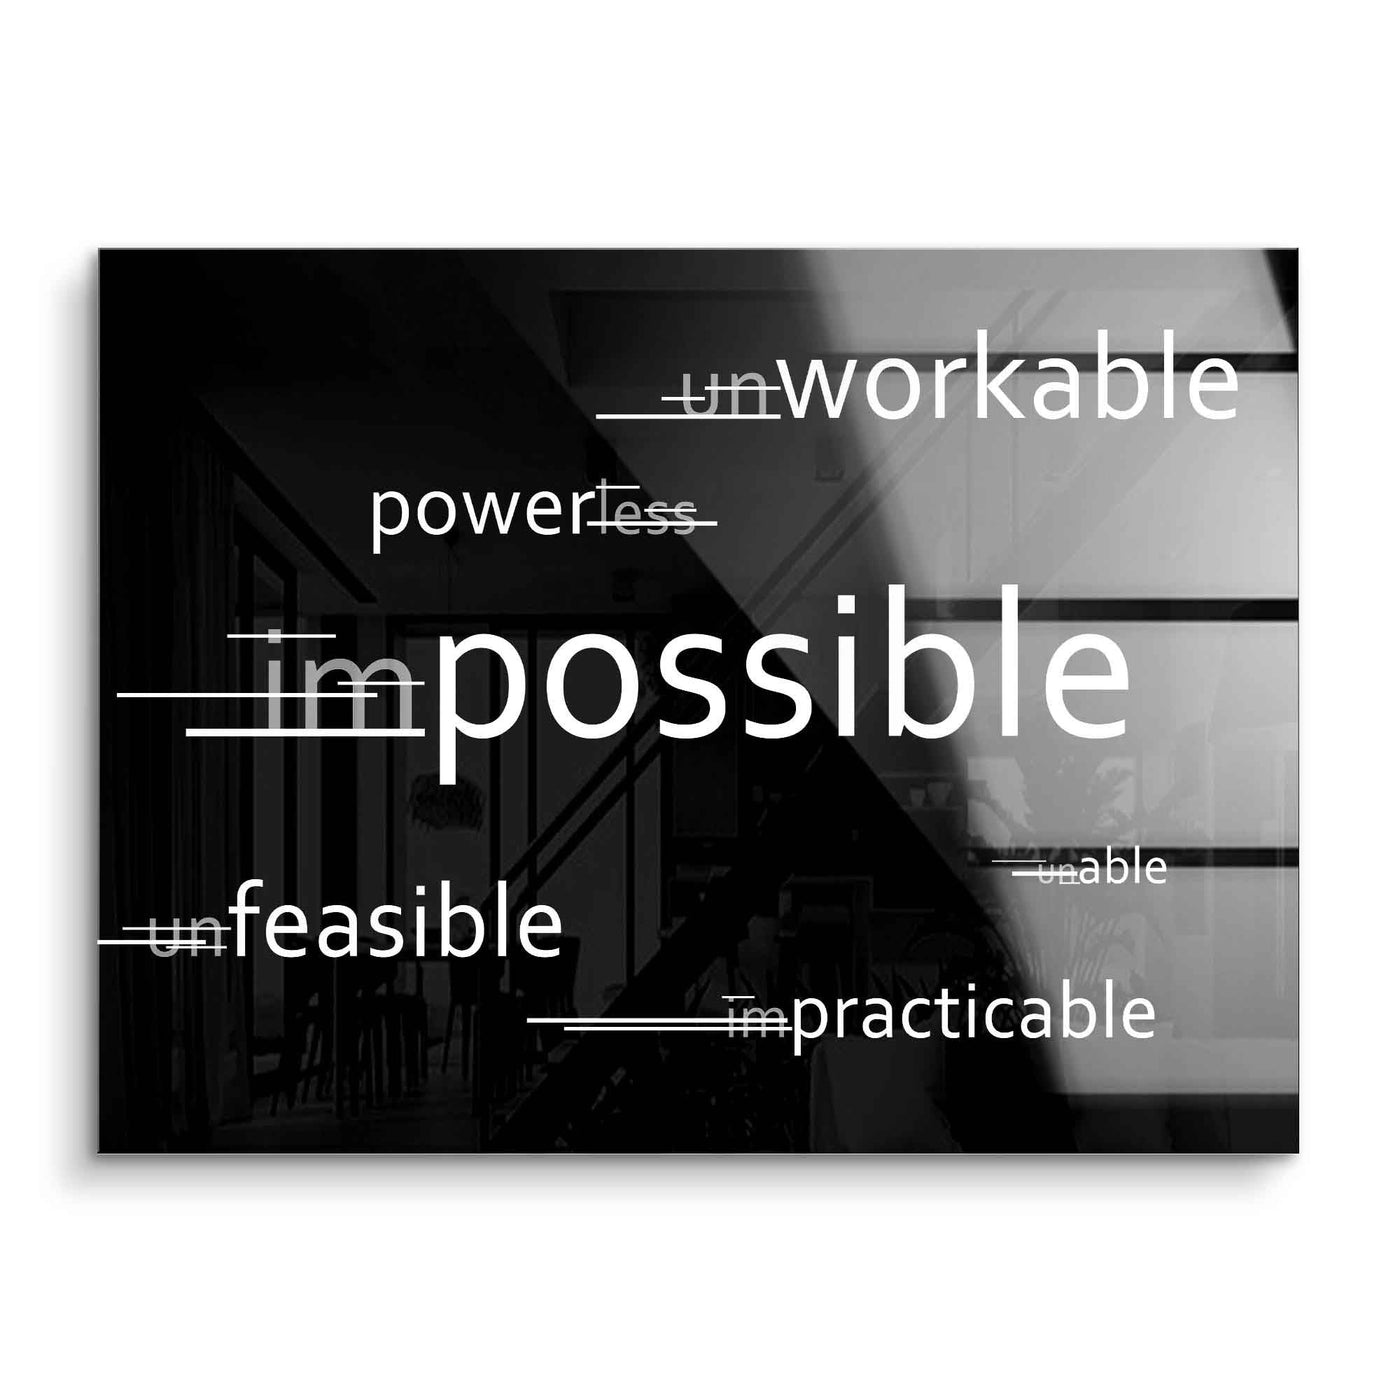 Possible - Power - Workable